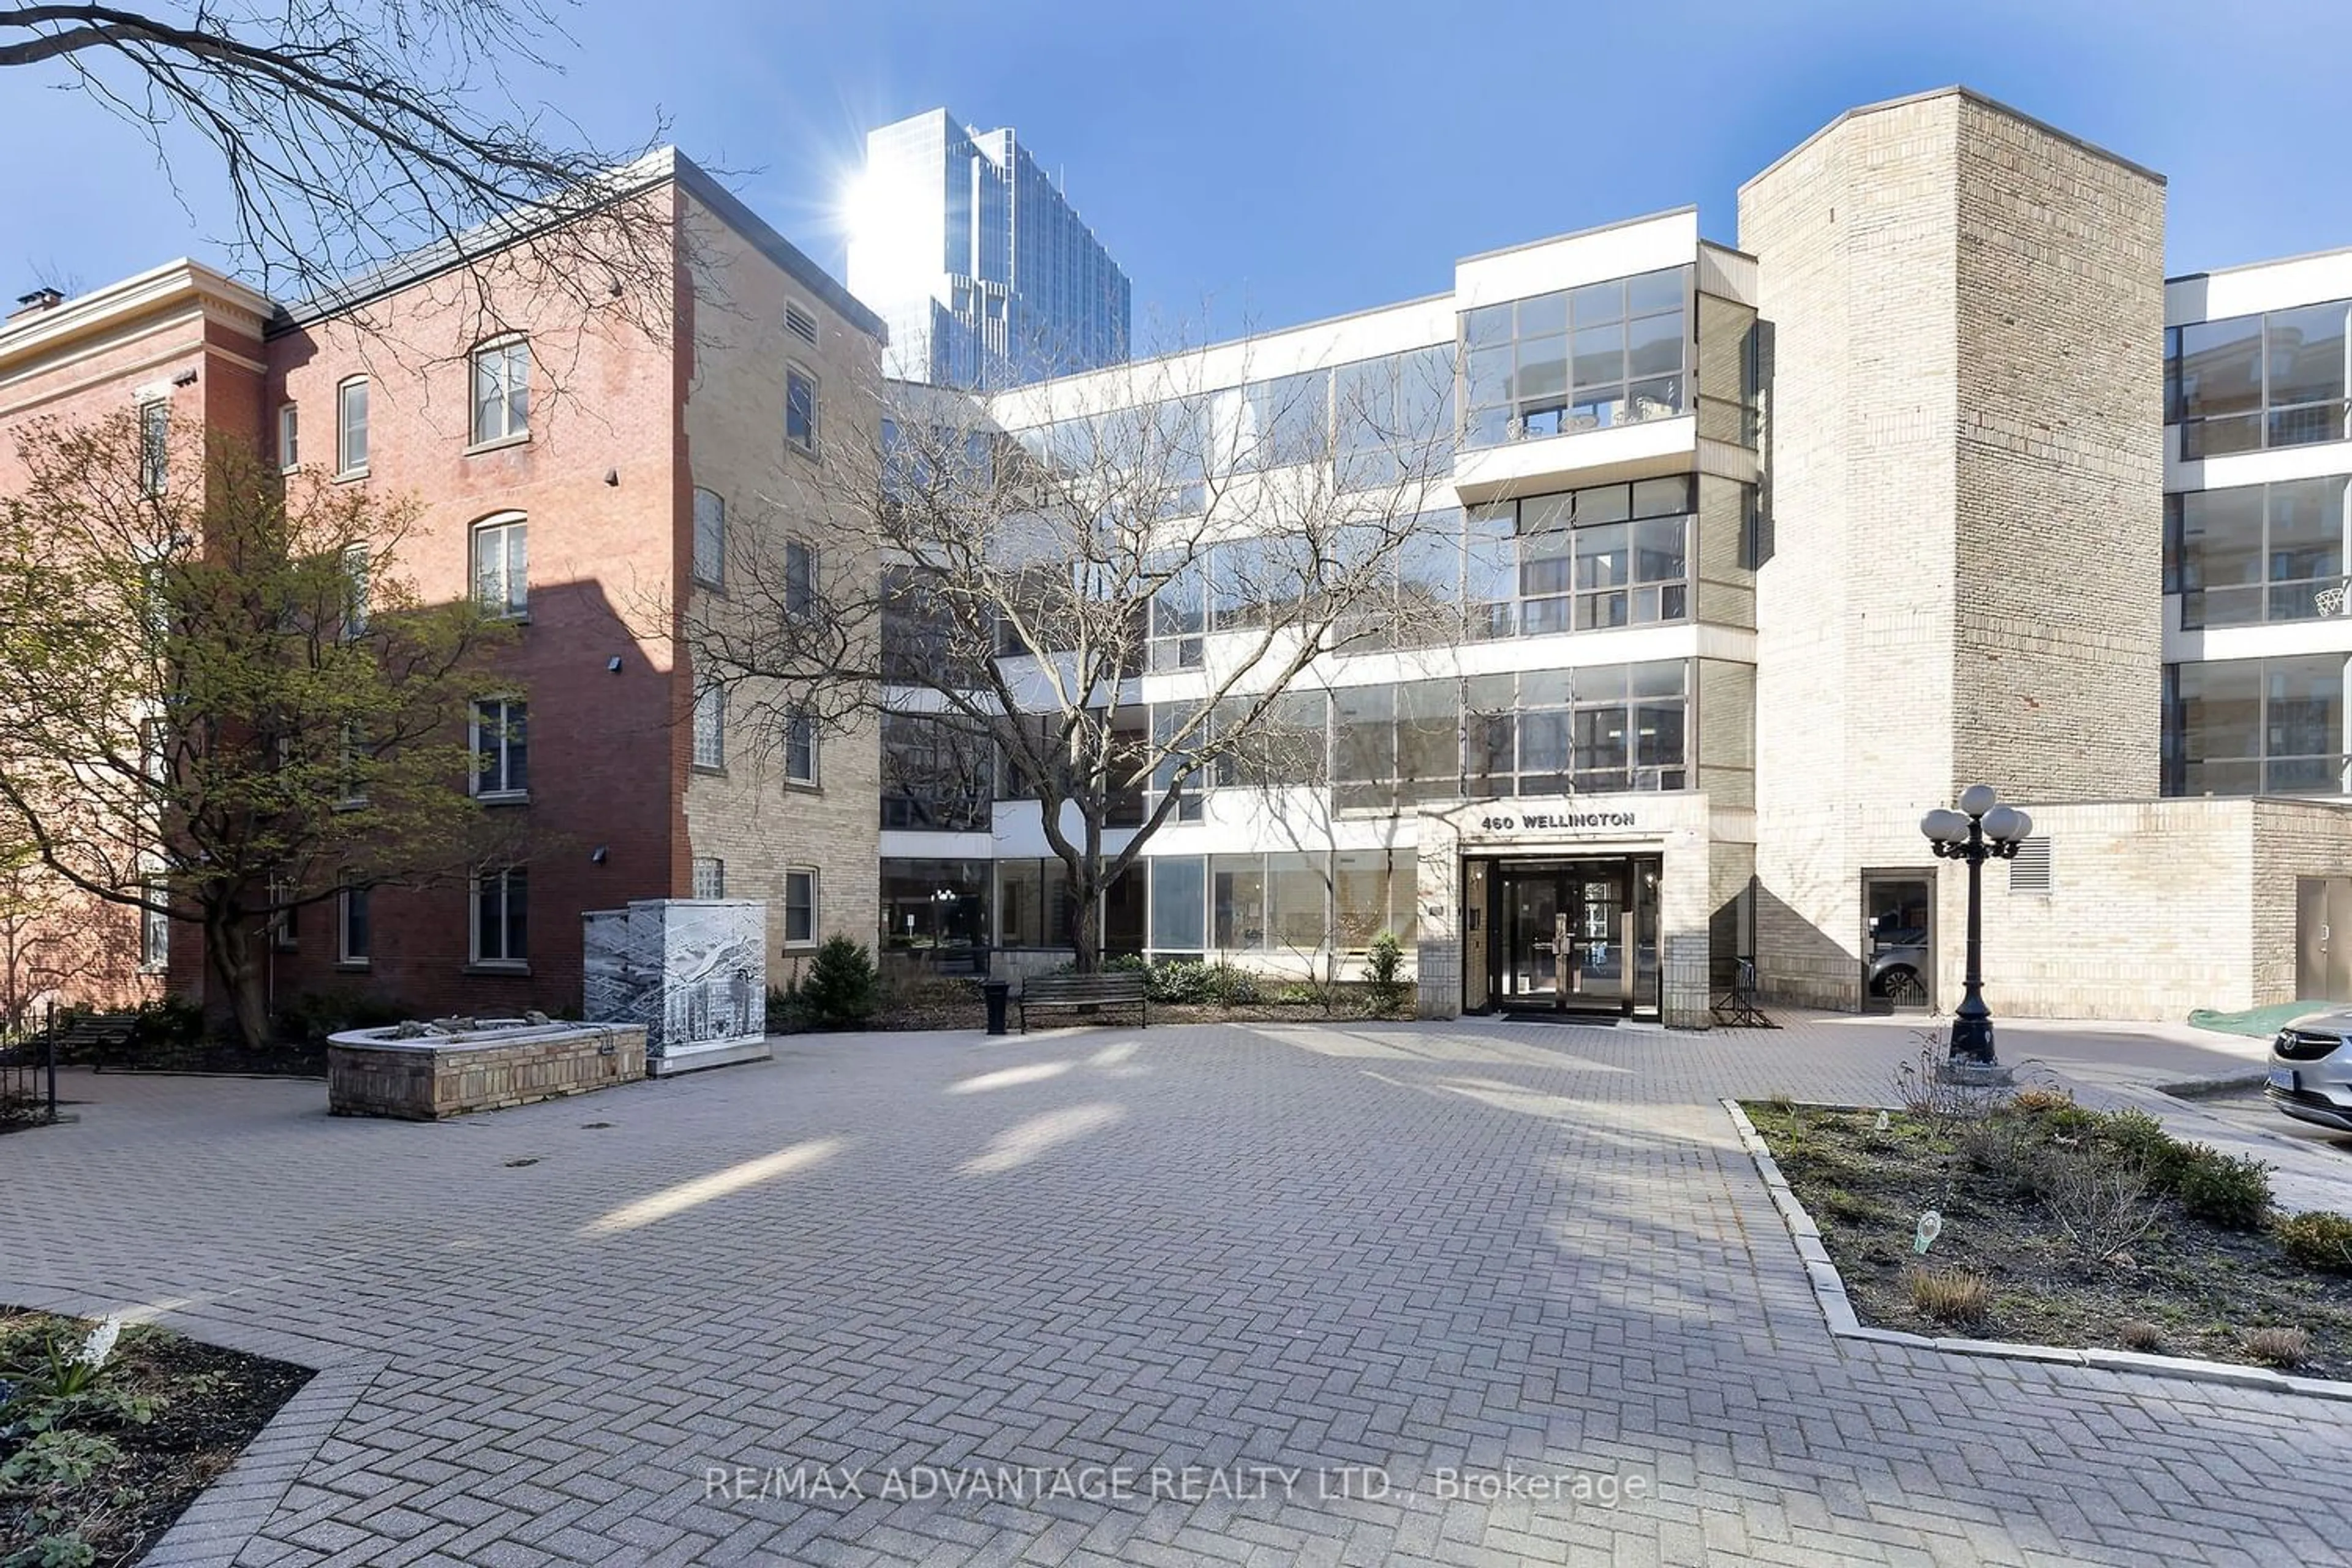 Street view for 460 Wellington St #407, London Ontario N6A 3P8